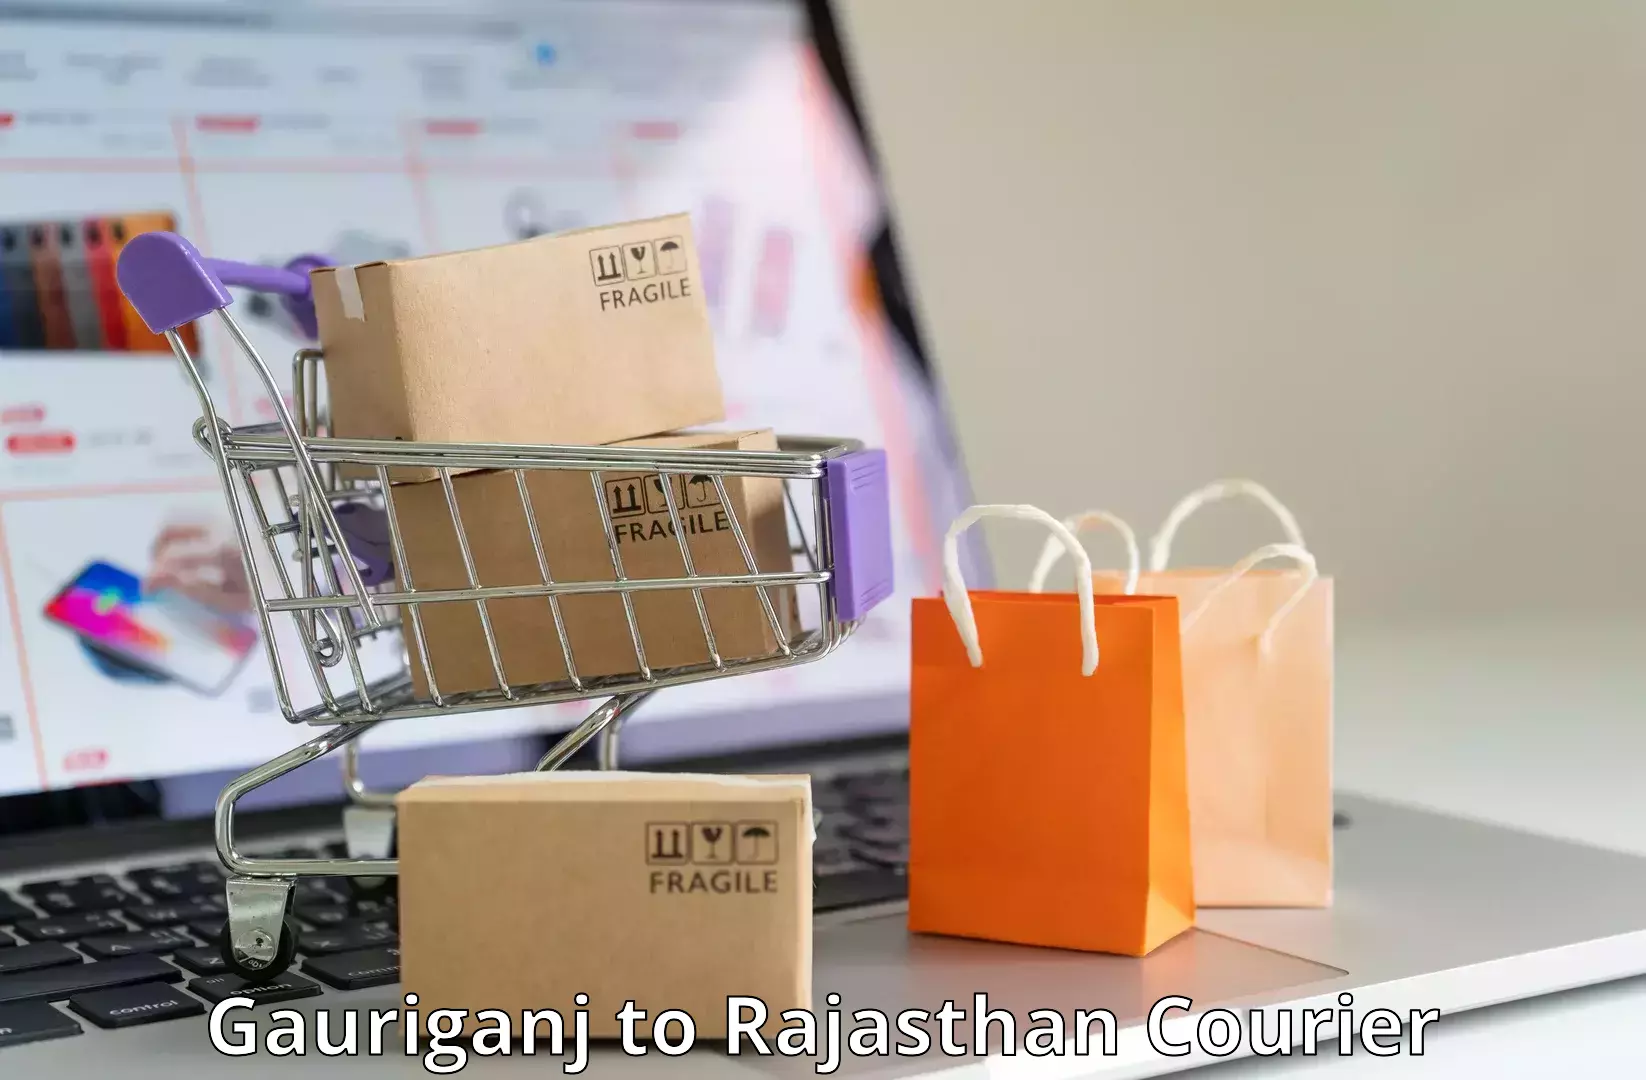 Residential courier service Gauriganj to Raila